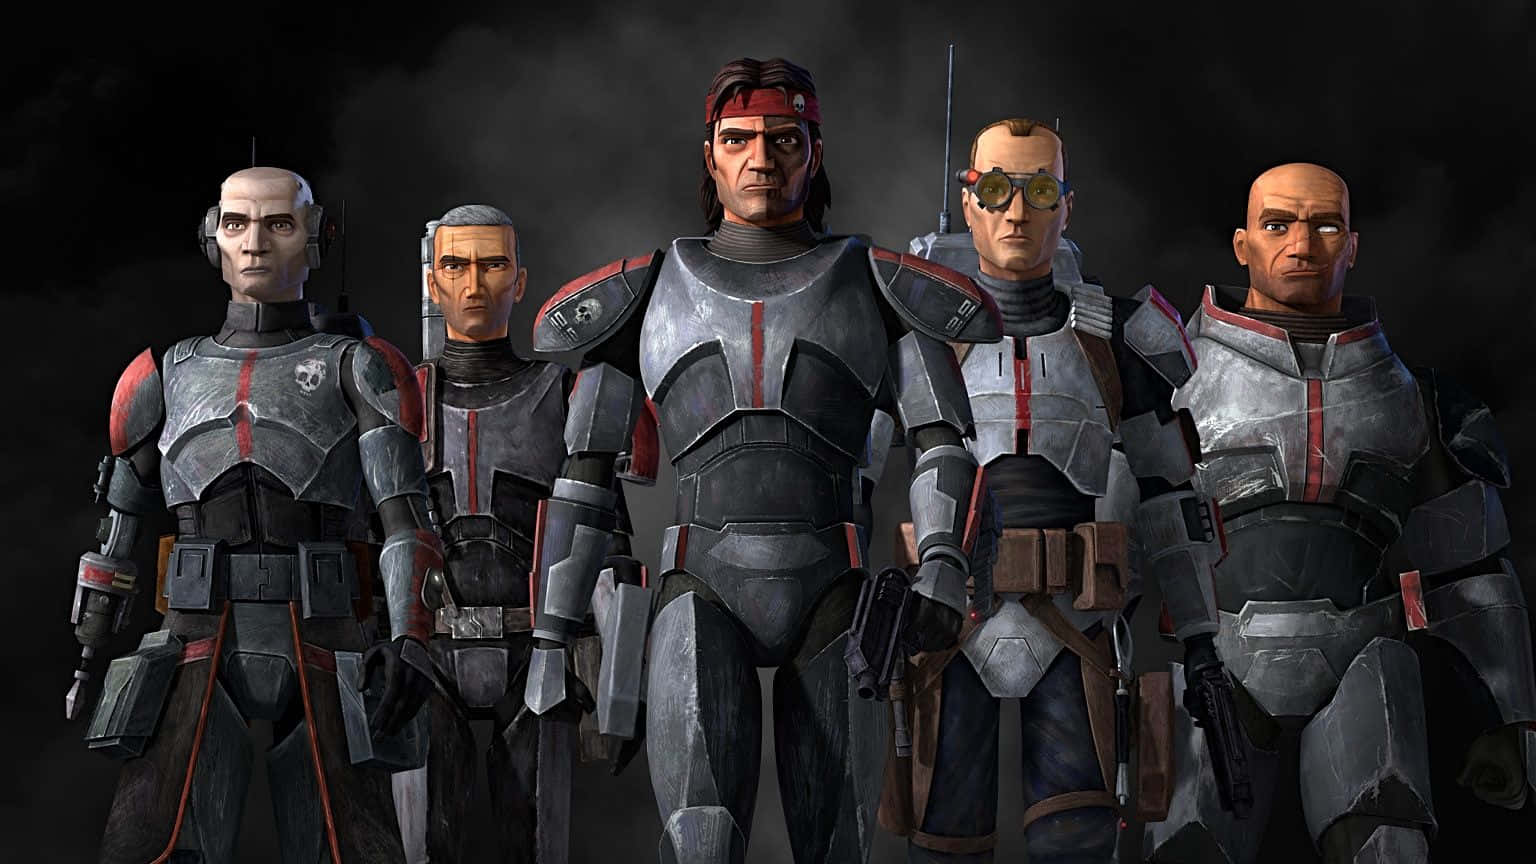 The Bad Batch, ready to take on The Empire's forces Wallpaper